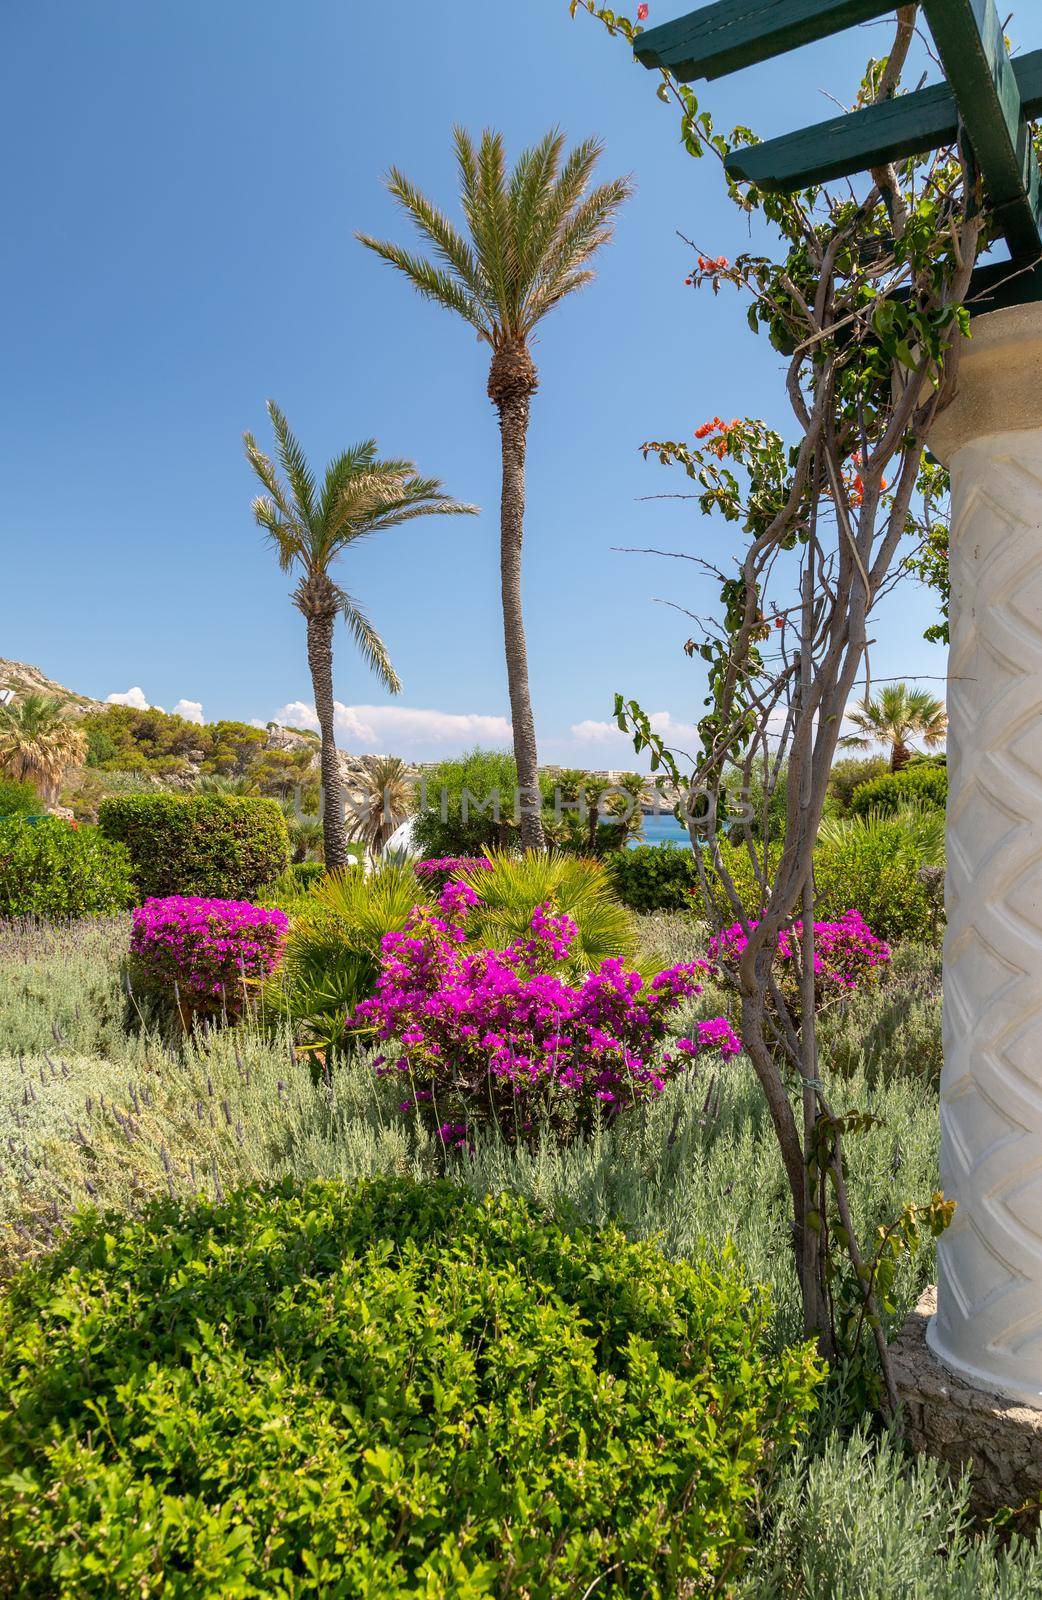 Garden with palm trees, purple flowers and green plants at Kallithea Therms, Kallithea Spring on Rhodes island, Greece by reinerc